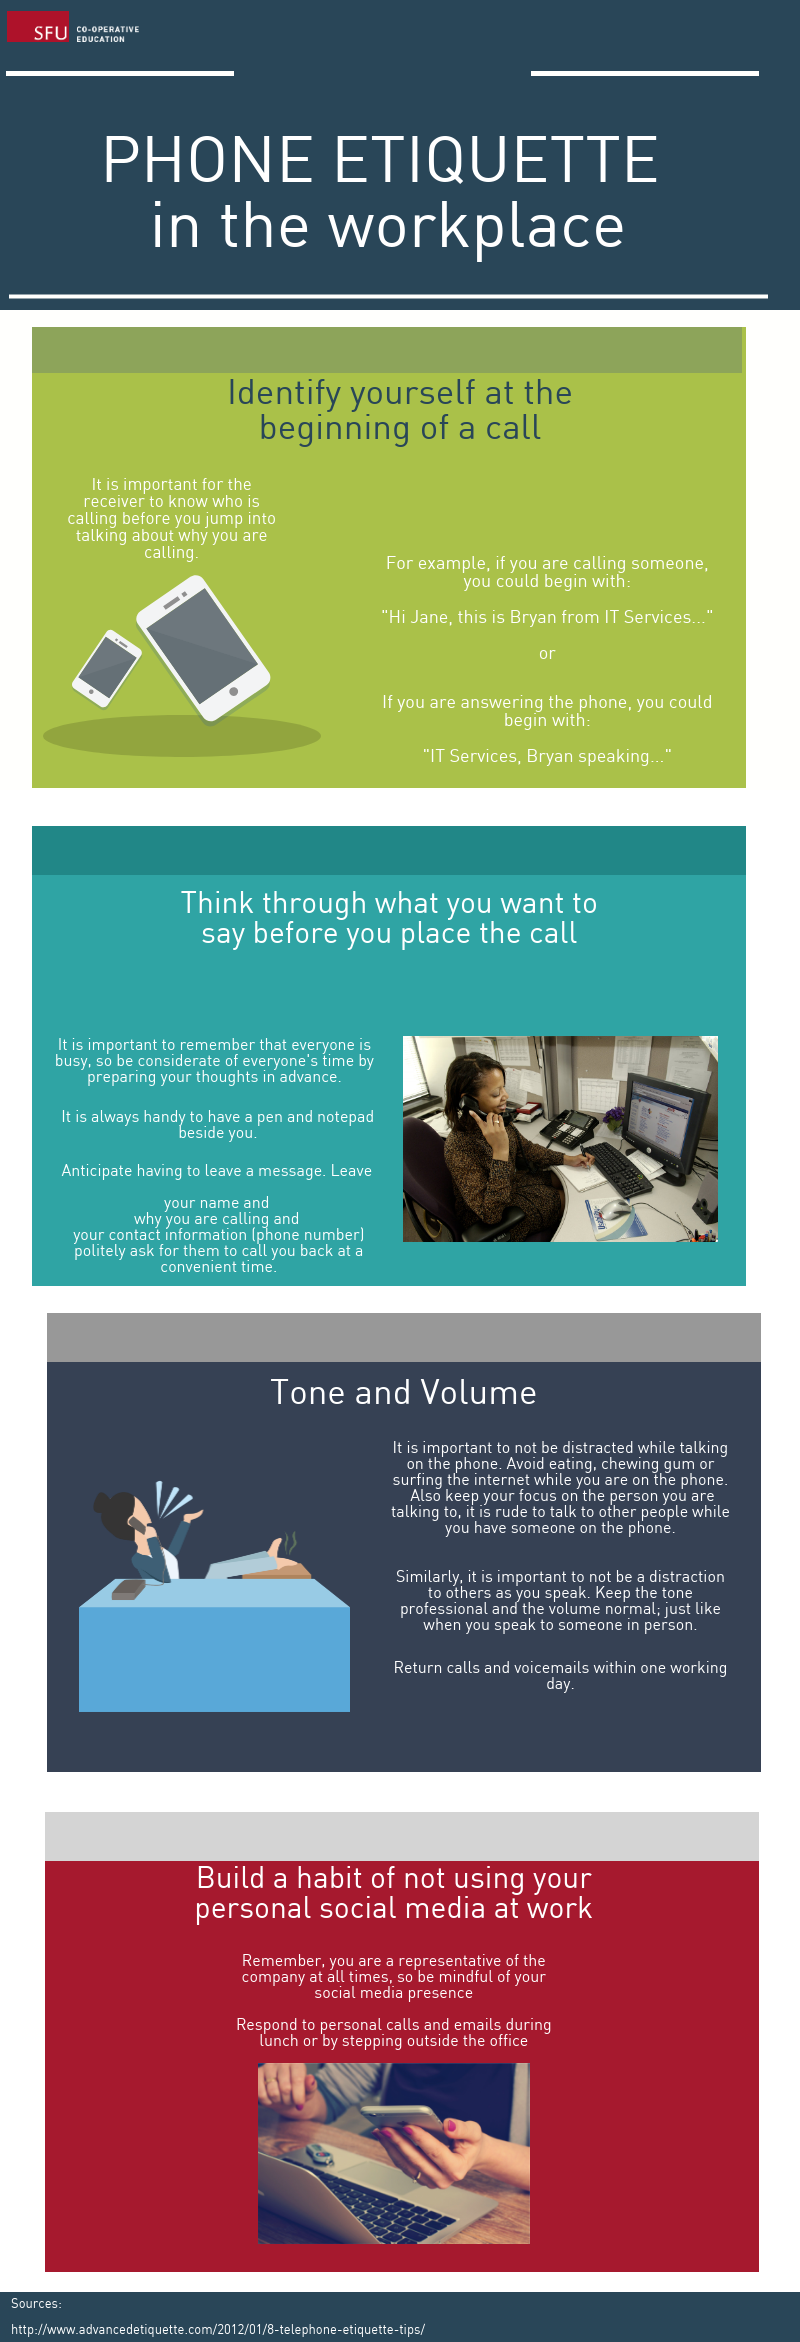 Phone Etiquette in the Workplace